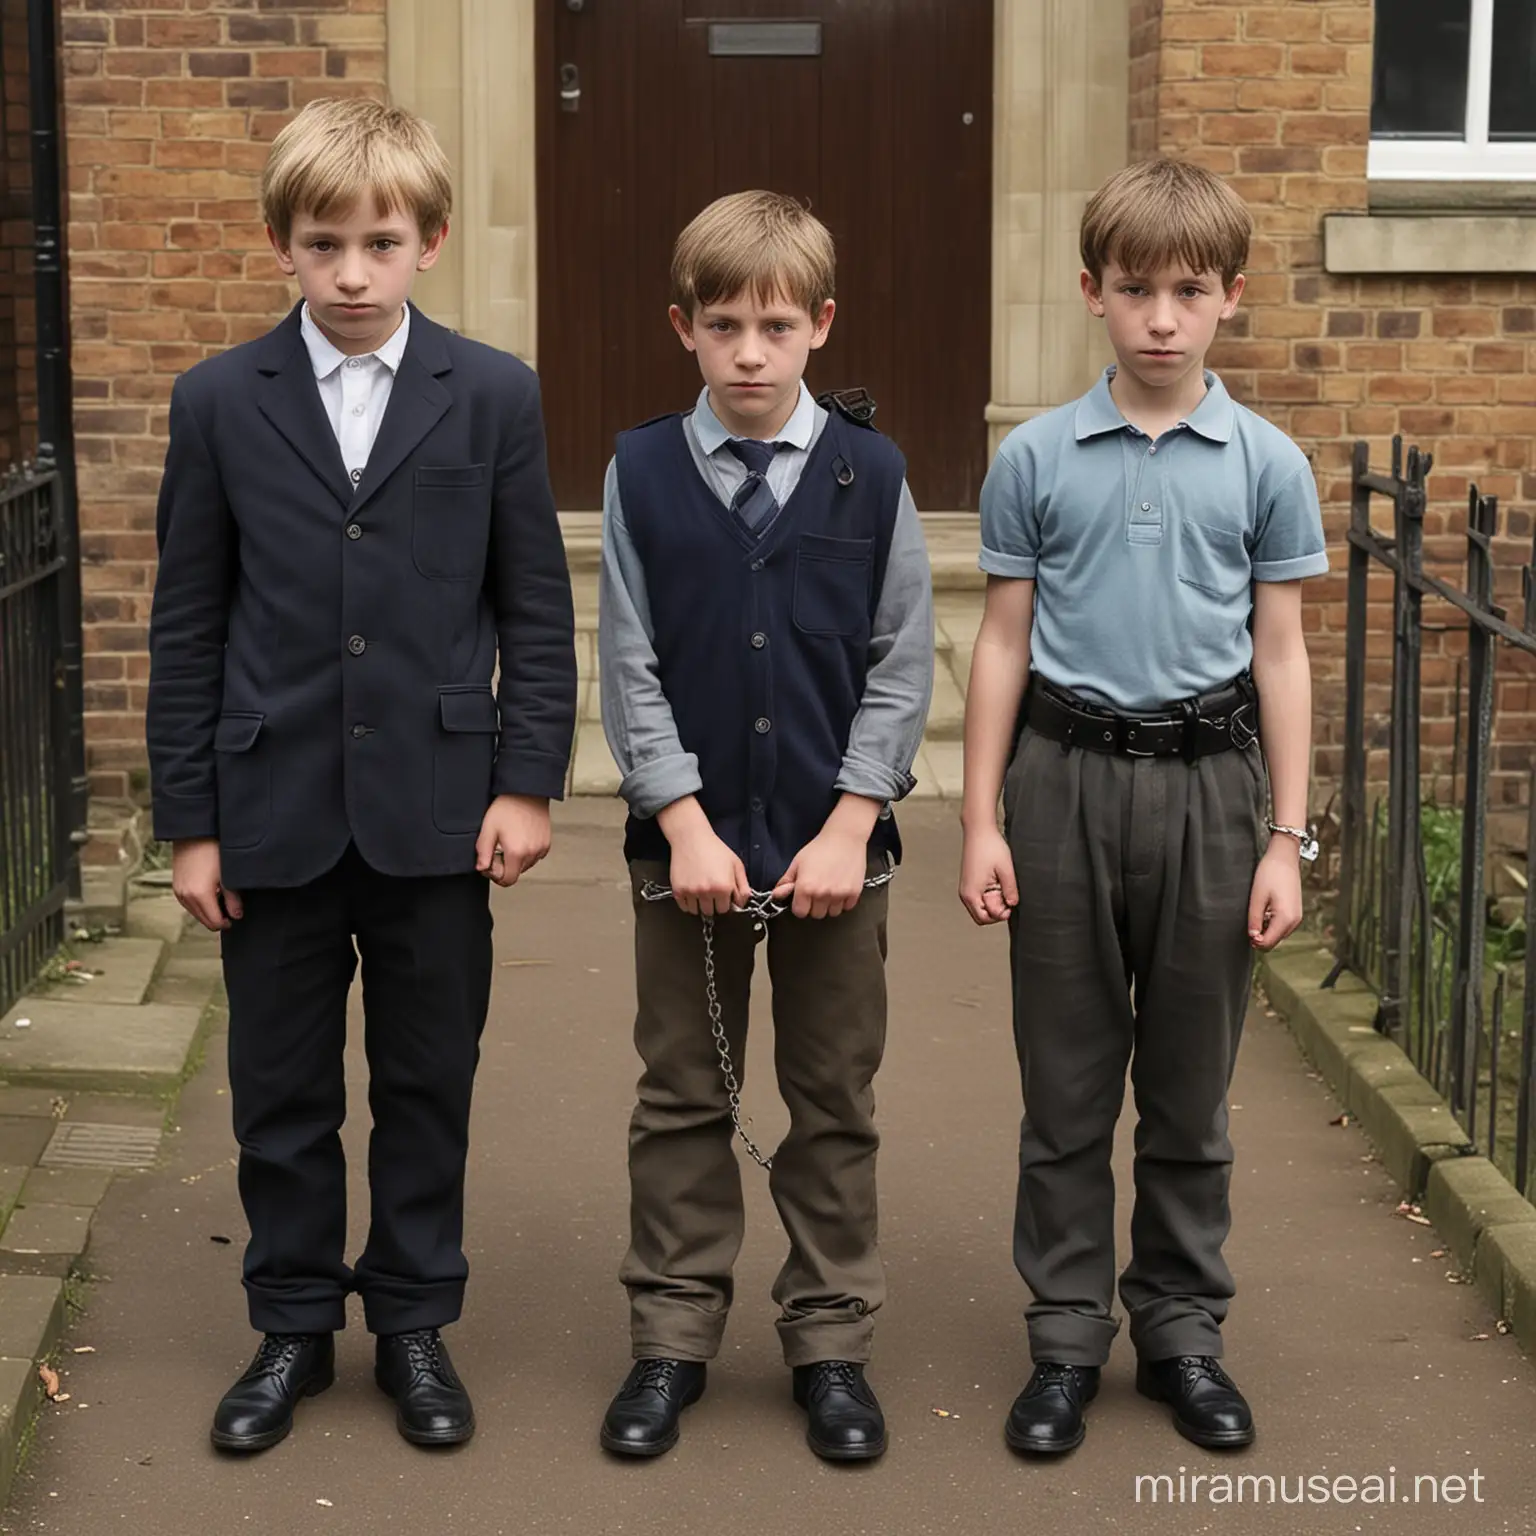 Image of two ten-year-old English children,at the moment they are arrested and taken from their homes in handcuffs,  the image must be hyperrealistic